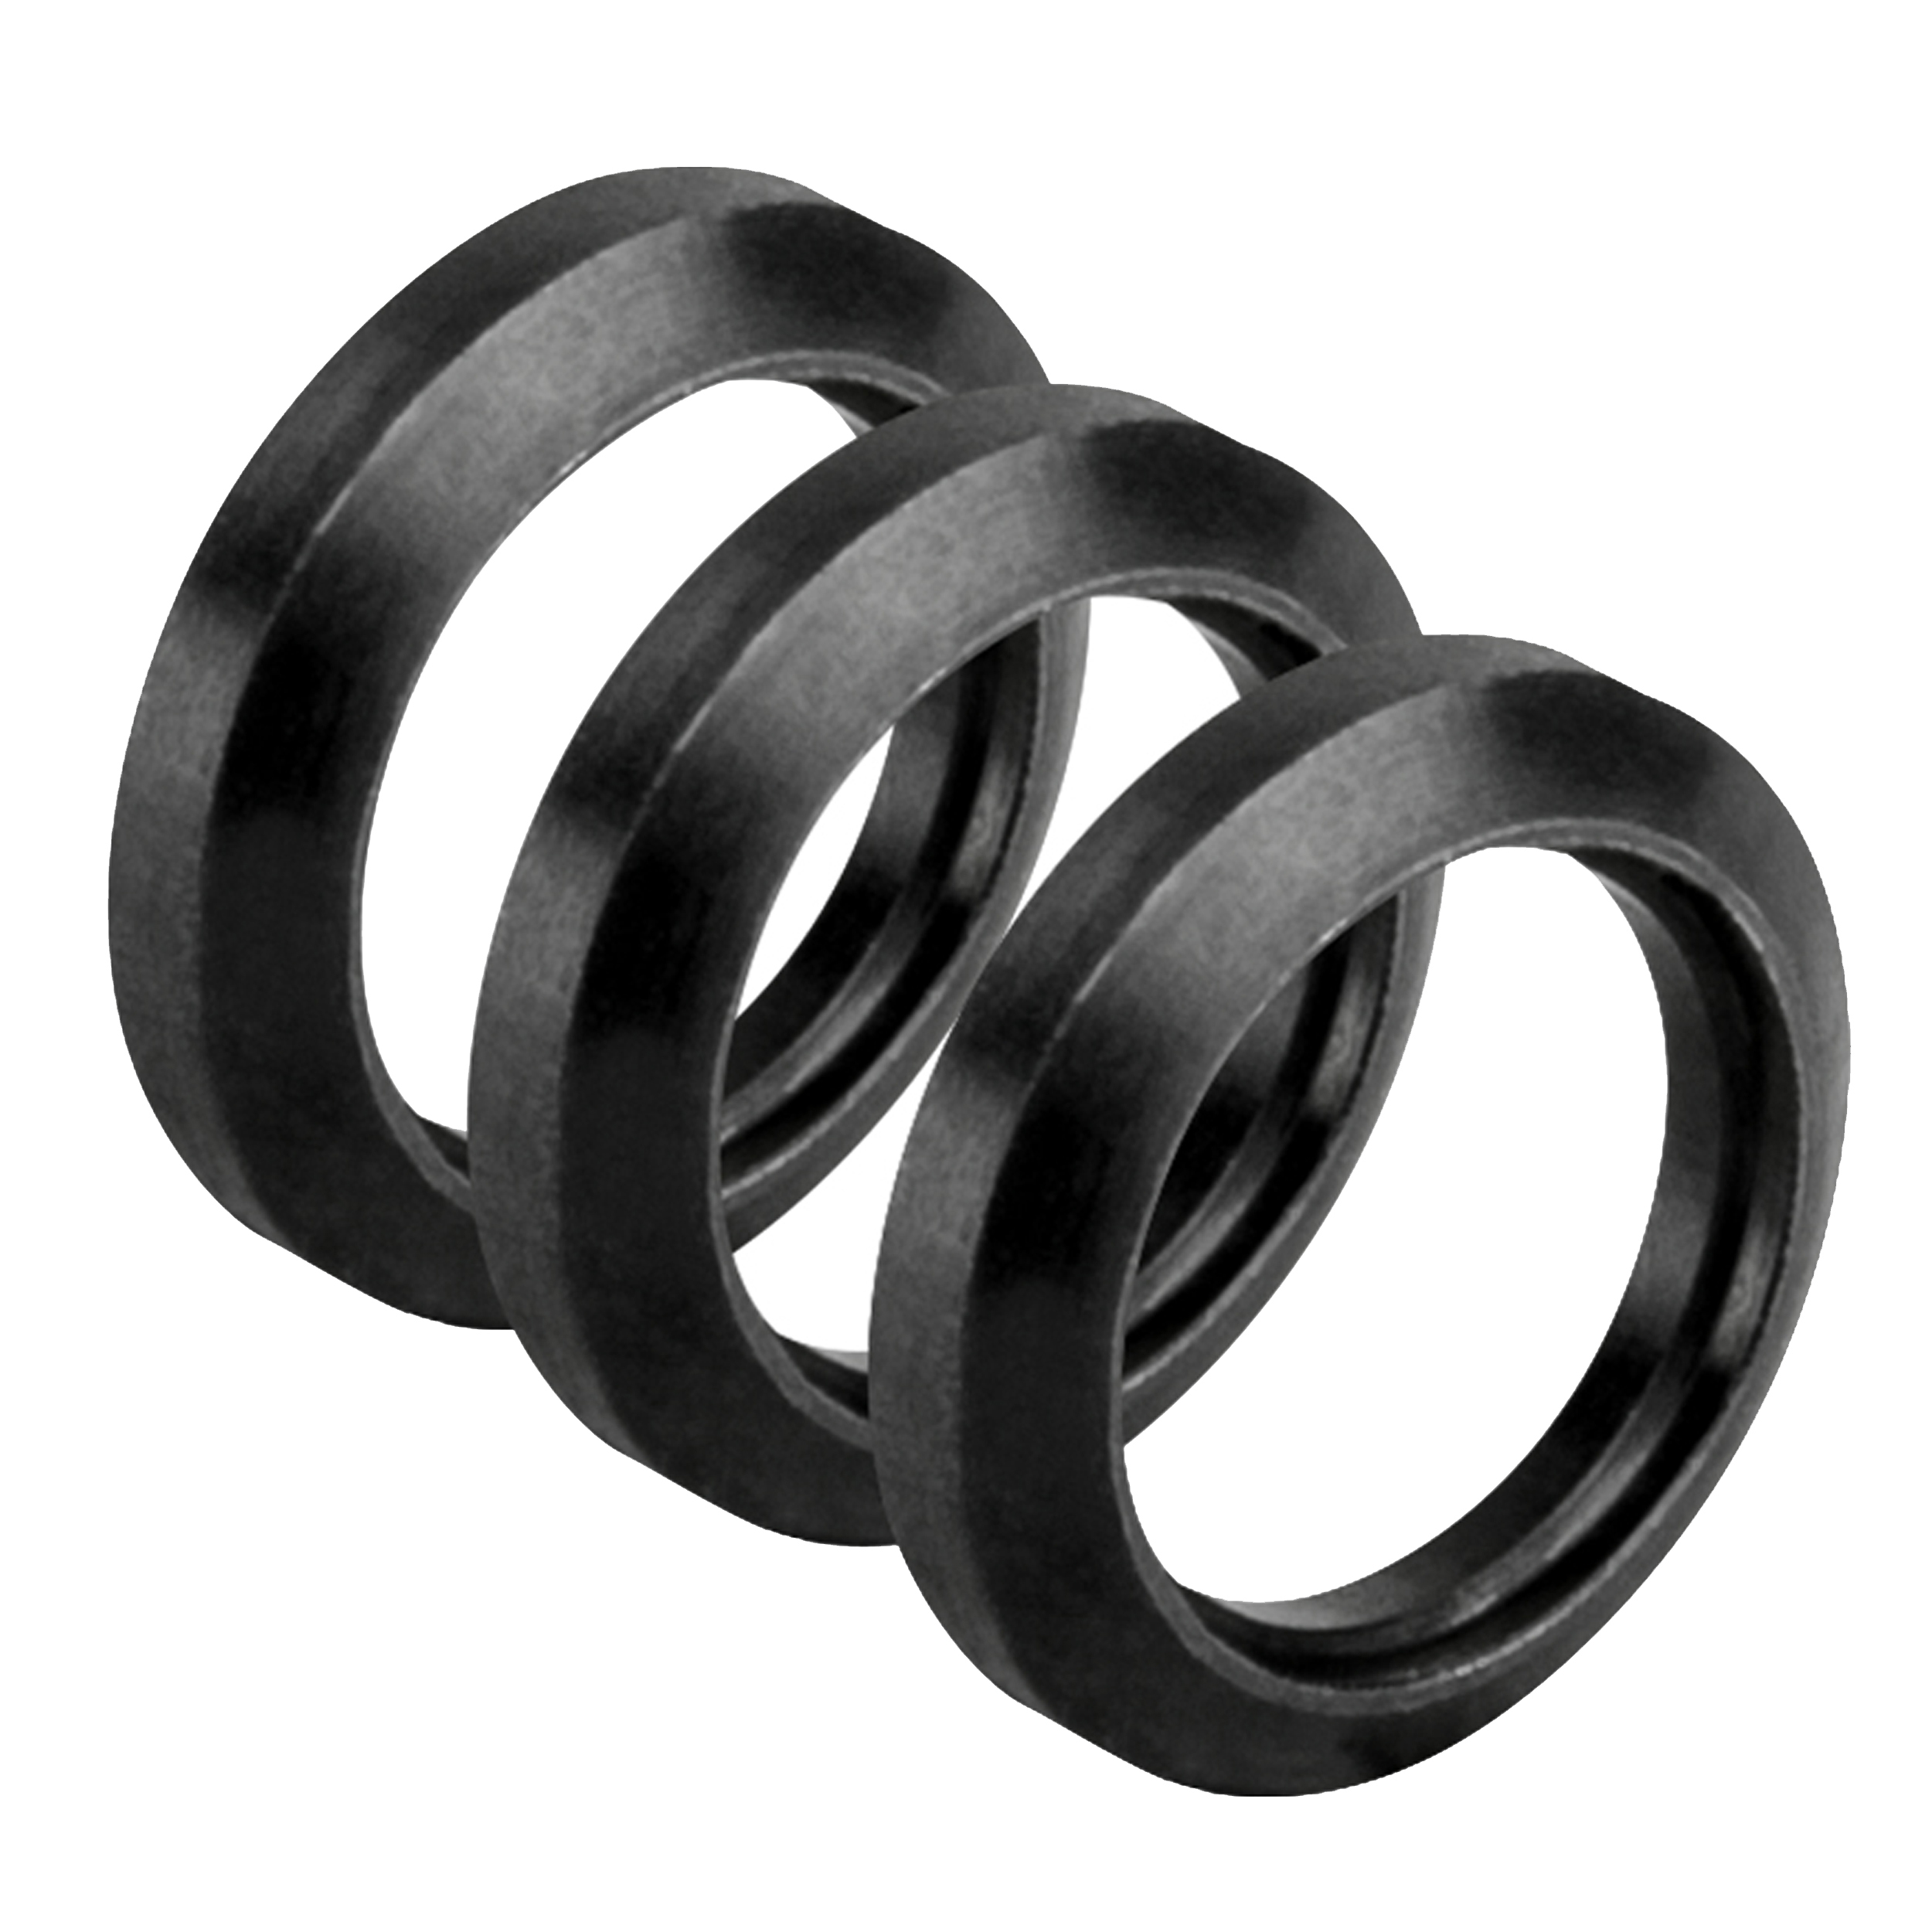 14mm ID Tight Fit Crush Washer for Muzzle Brake for Gunsmithing 14 19mm OD 